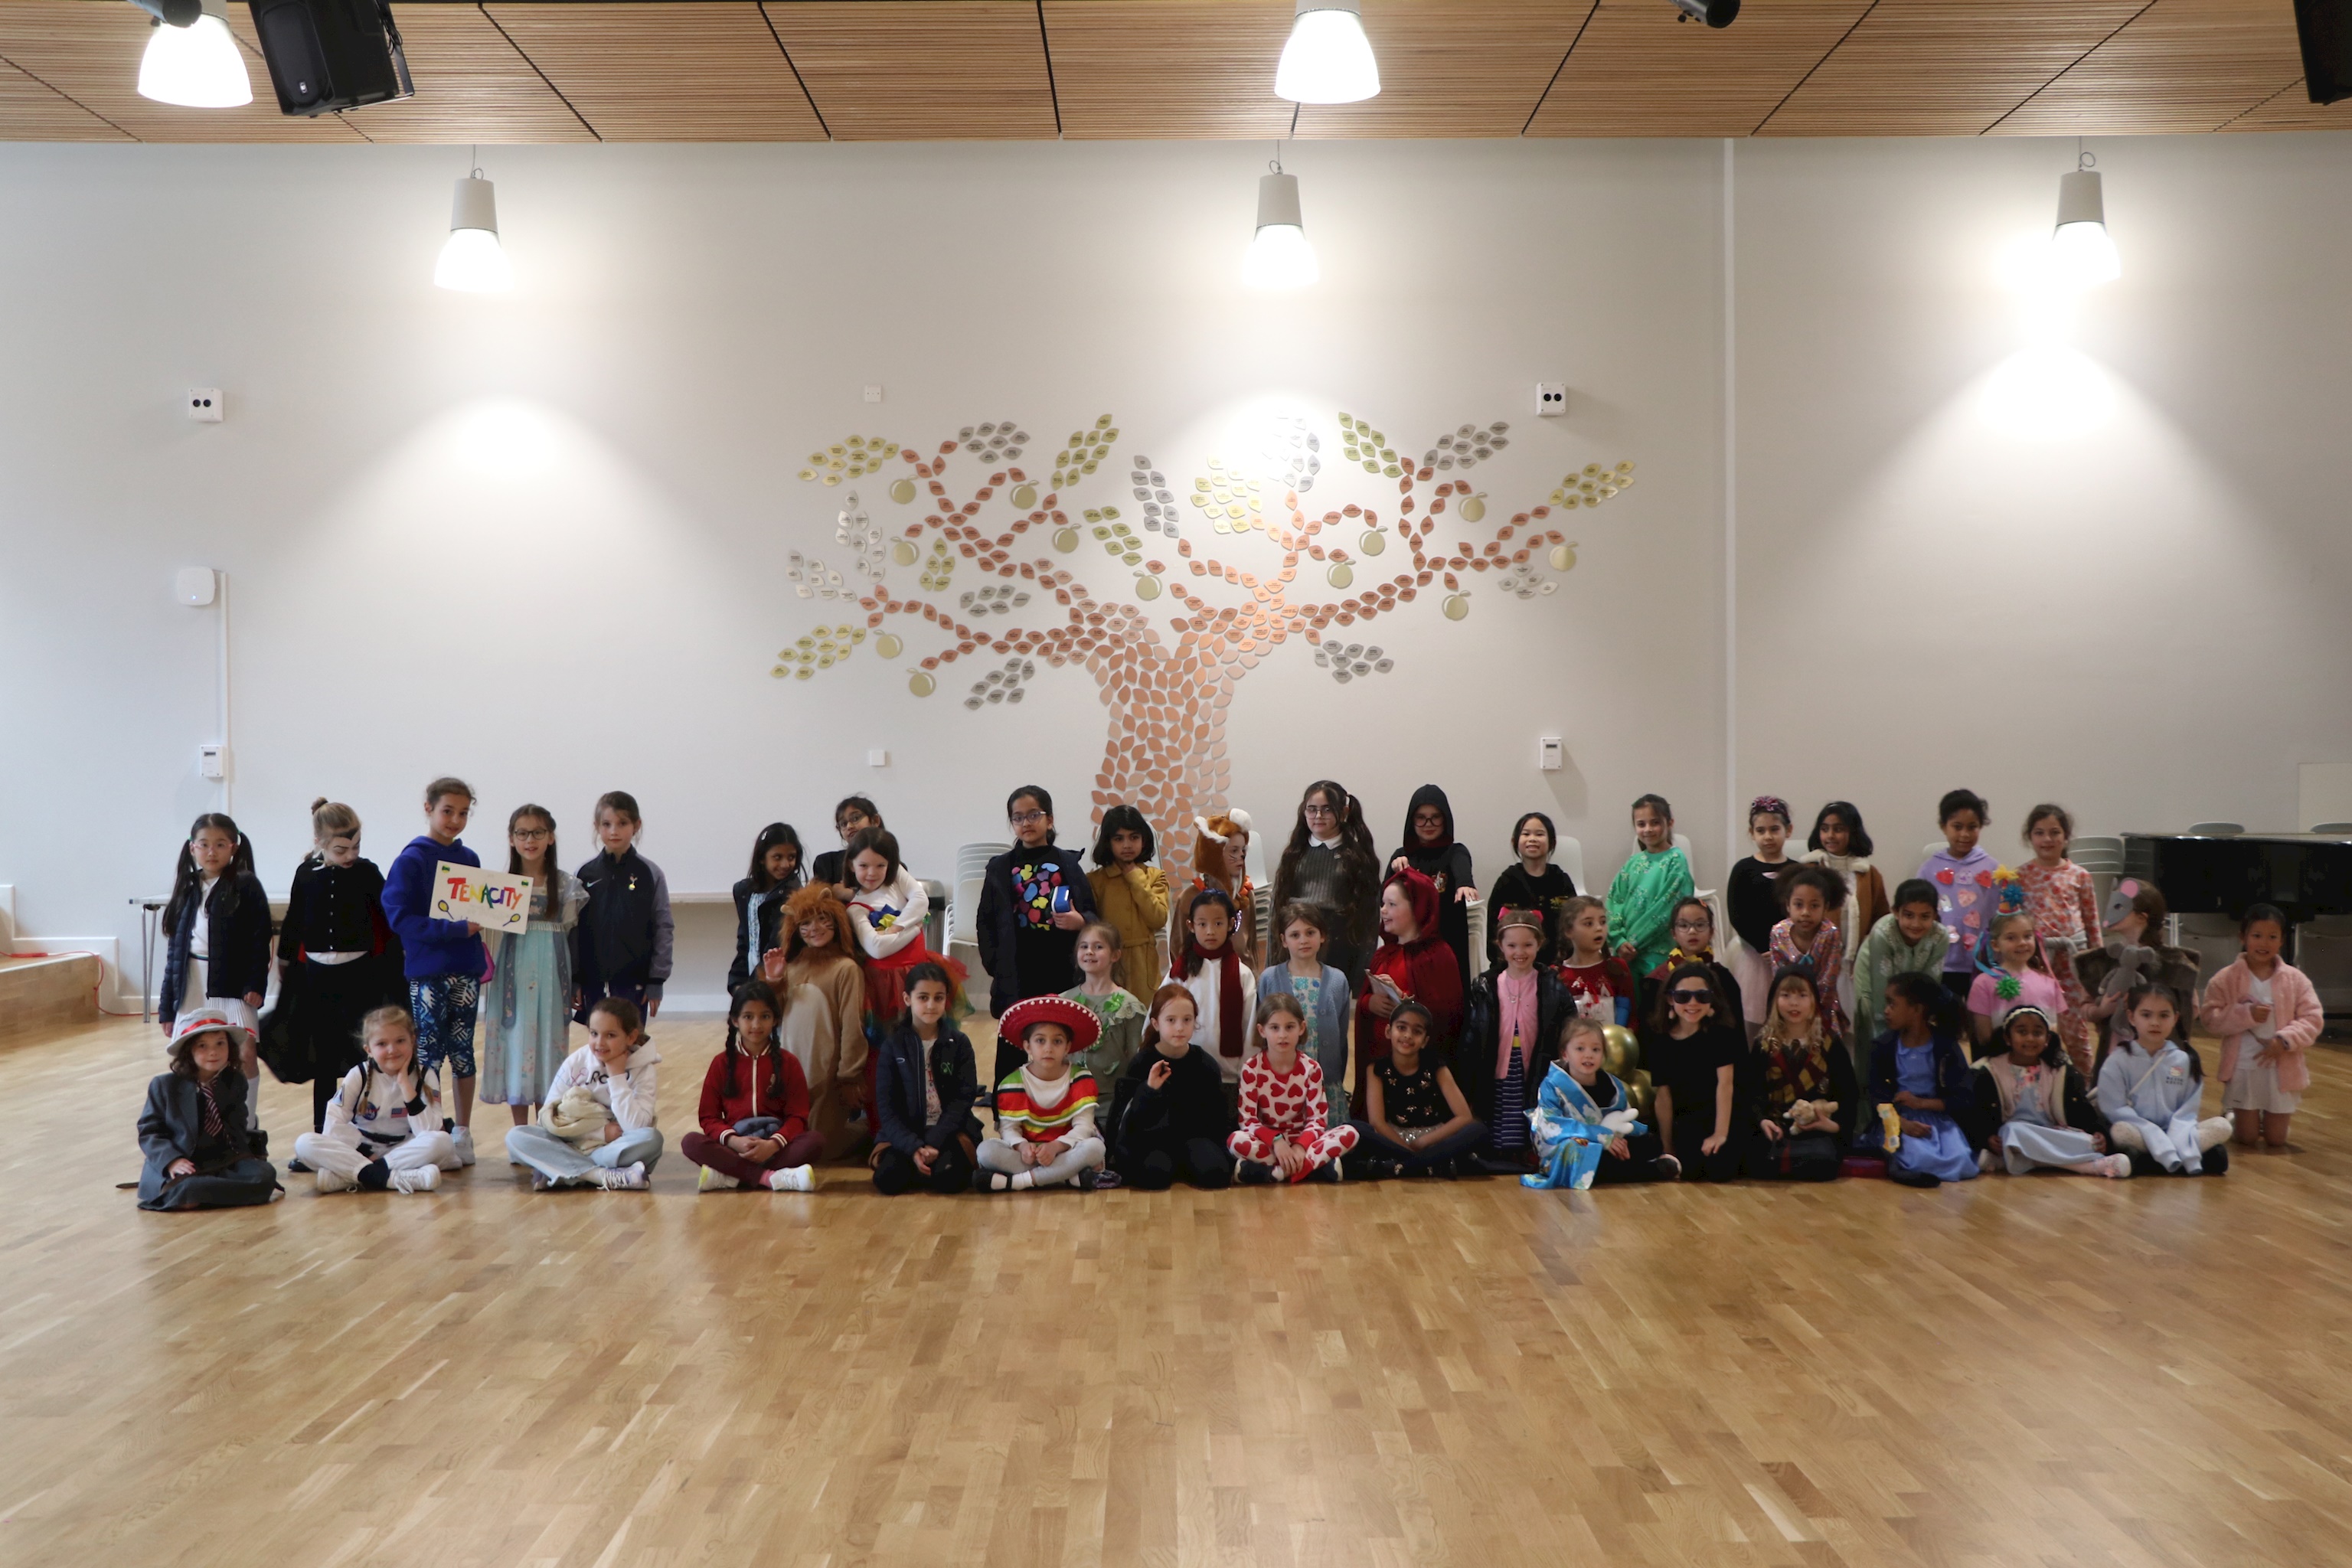 A group photograph of Year 3, showing all of their World Book Day costumes